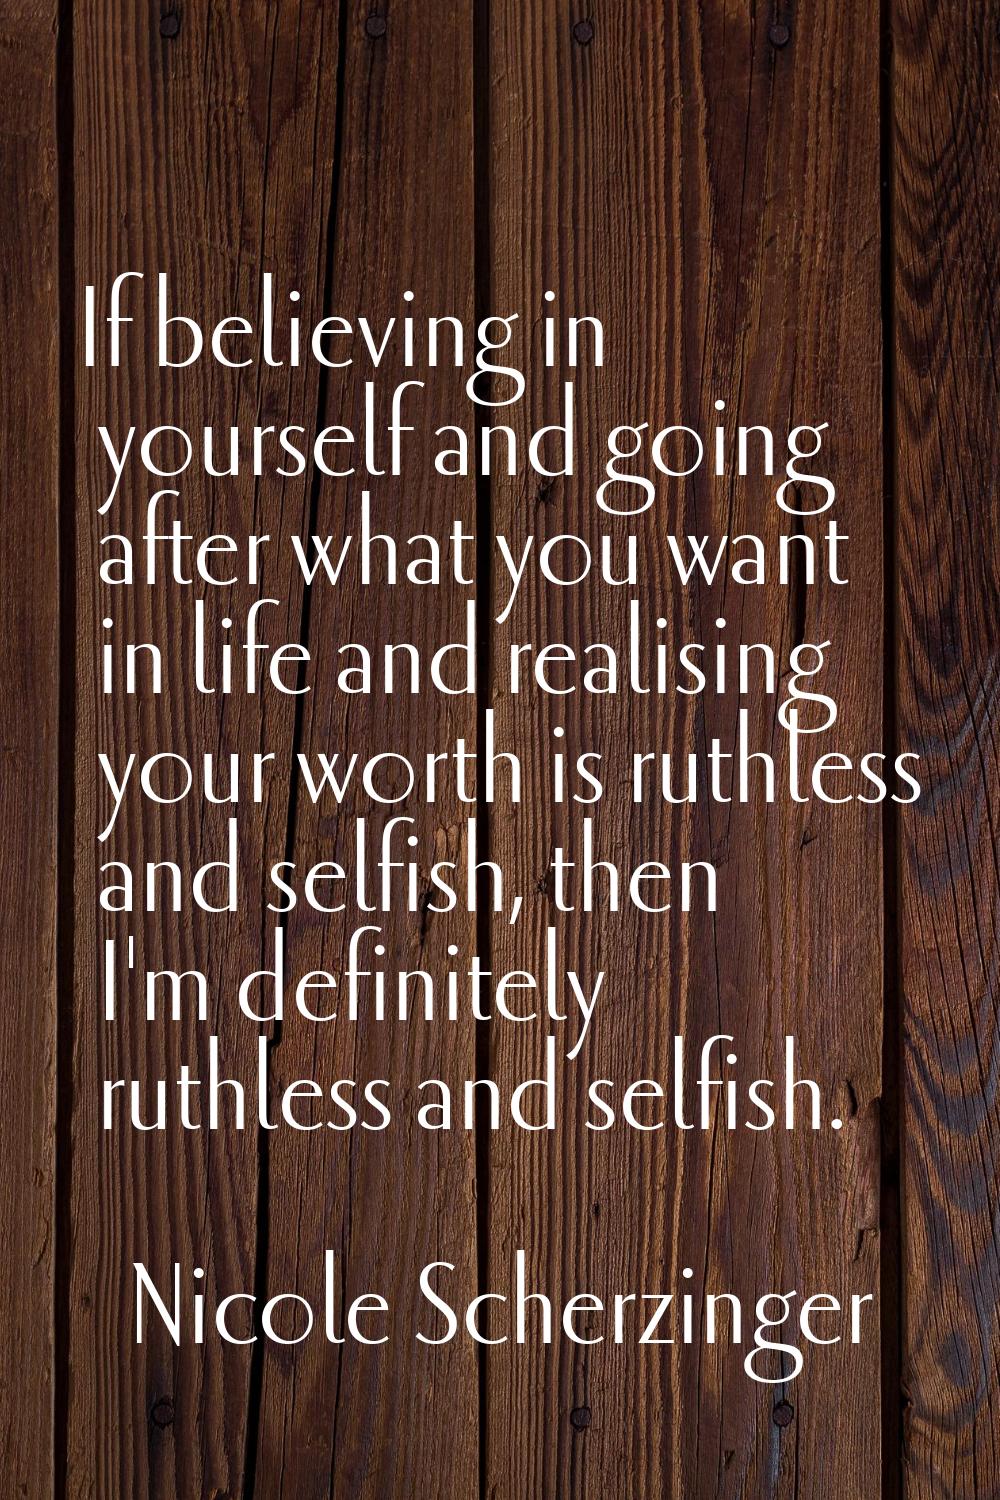 If believing in yourself and going after what you want in life and realising your worth is ruthless